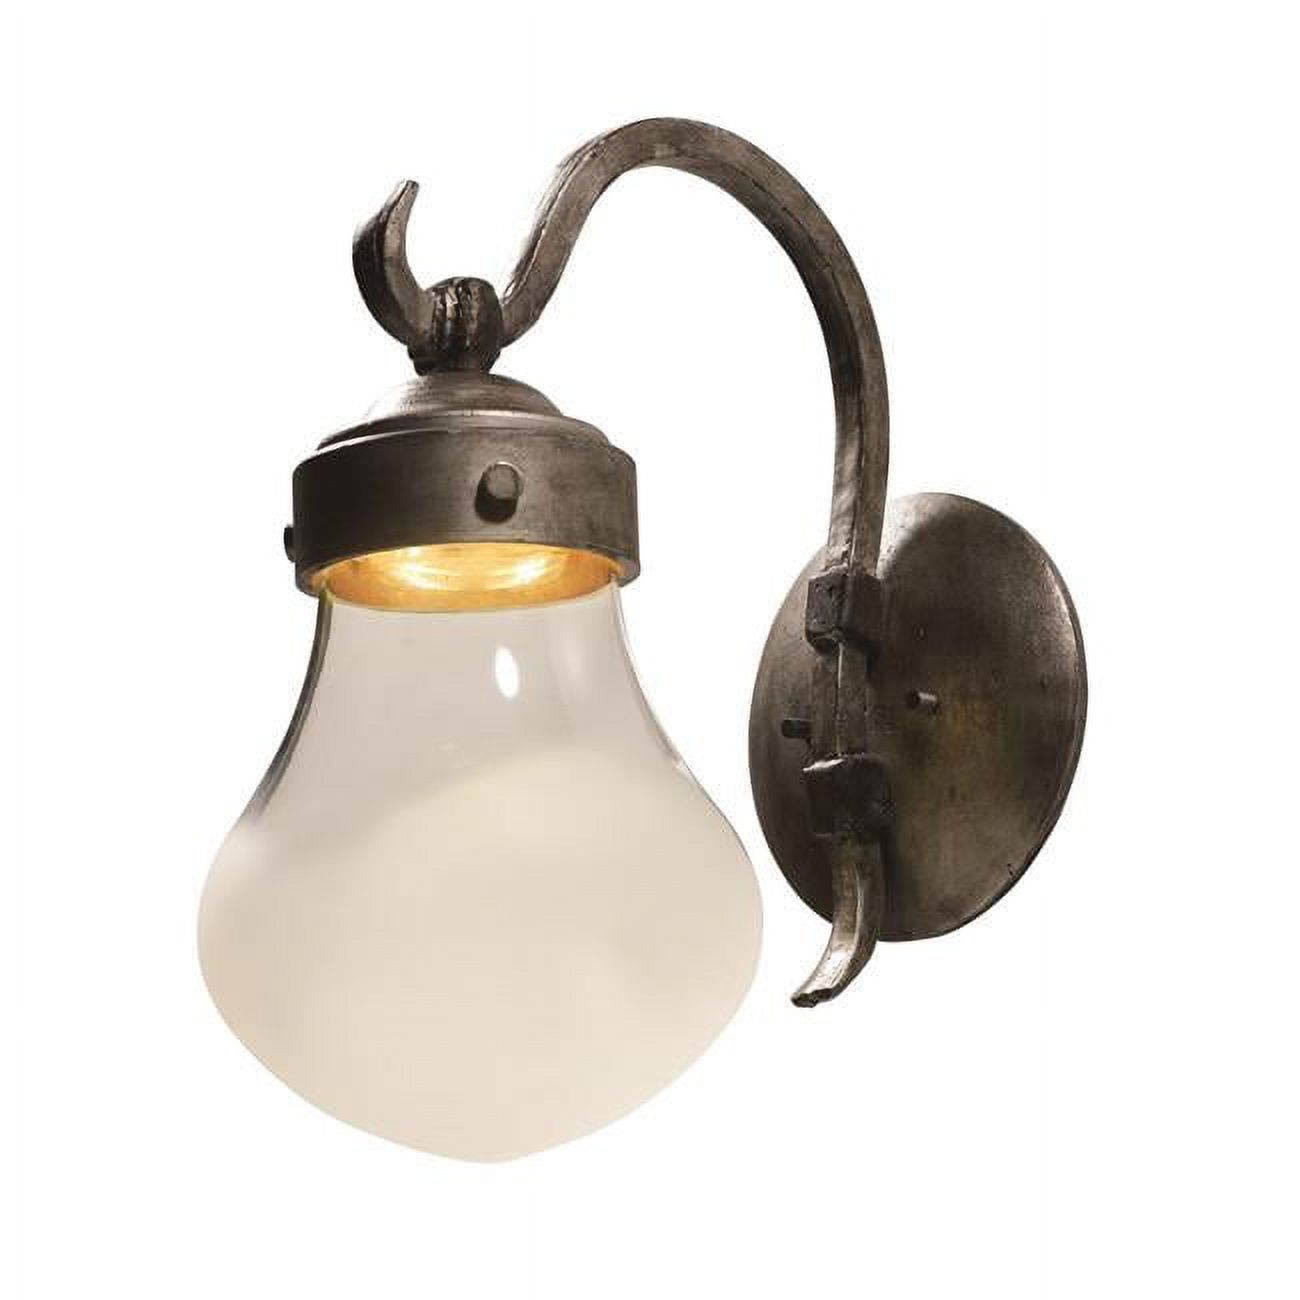 16.25 in. Rustica LED 1 Light Outdoor Wall Lantern - Blacksmith - image 1 of 1